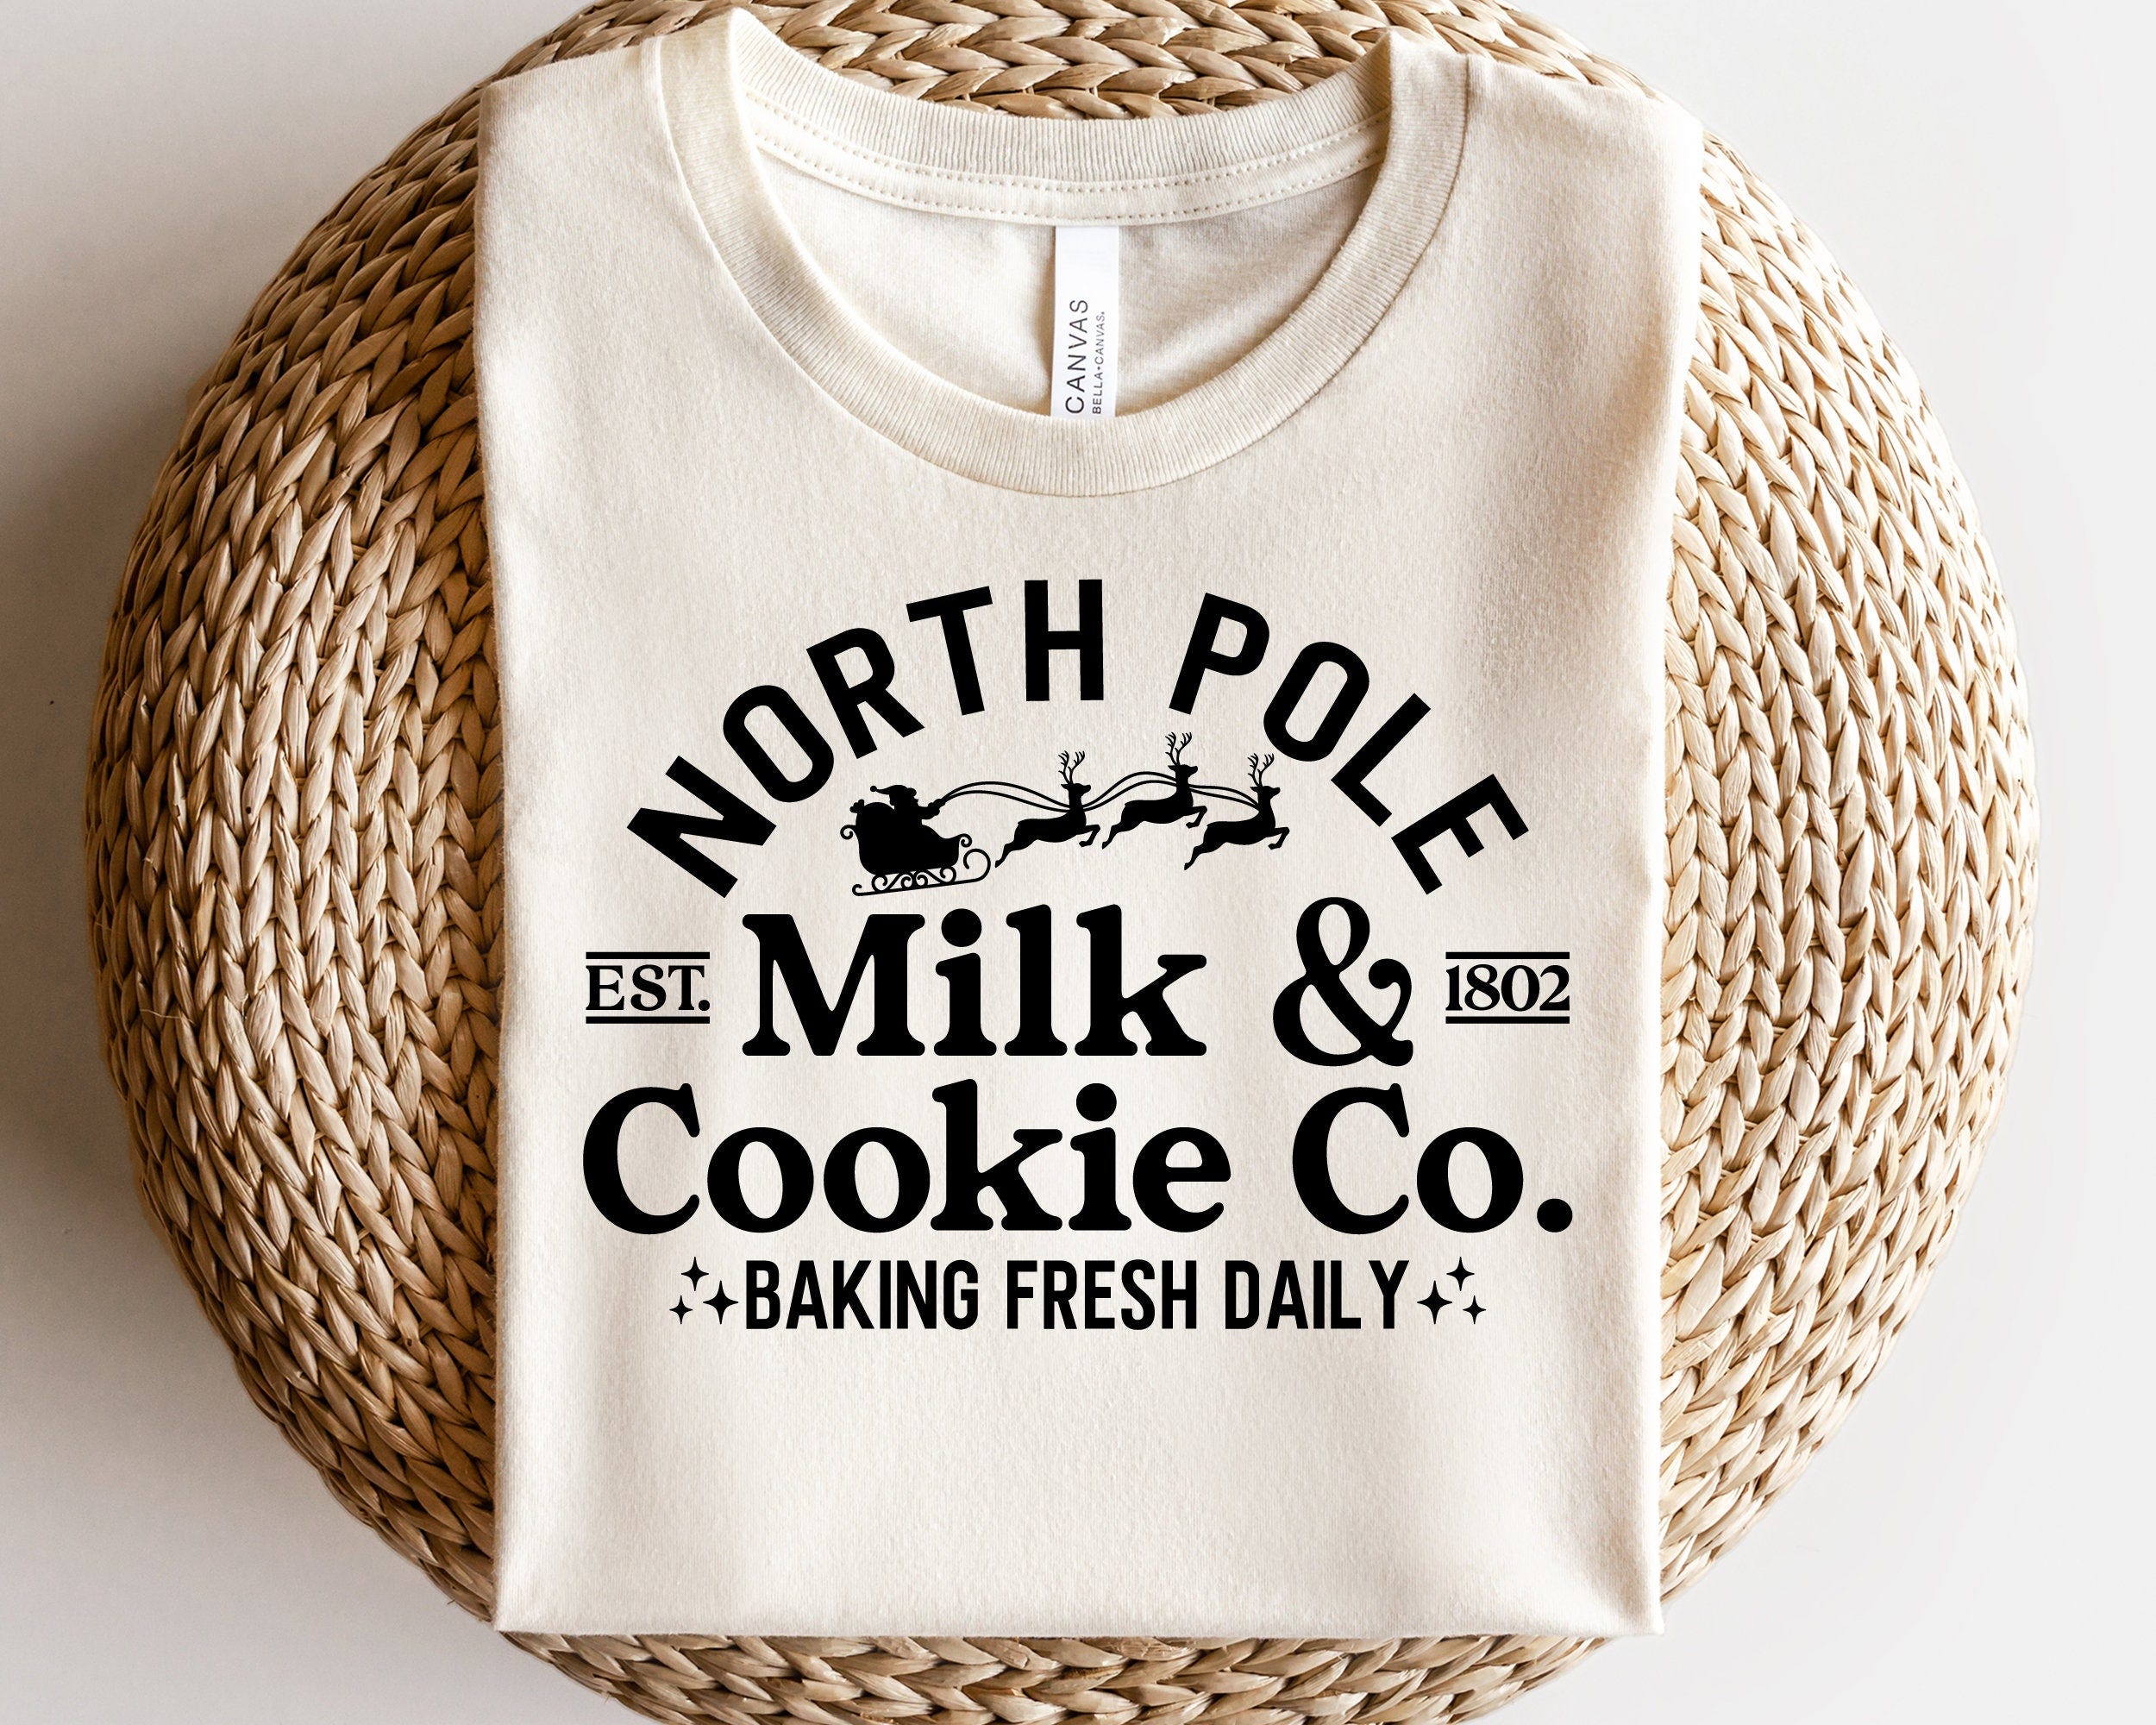 North Pole Milk Cookie Company SVG, Christmas Svg, Brewing Co Svg, Farmhouse Png, Vintage Christmas Shirt, Svg Files for Cricut